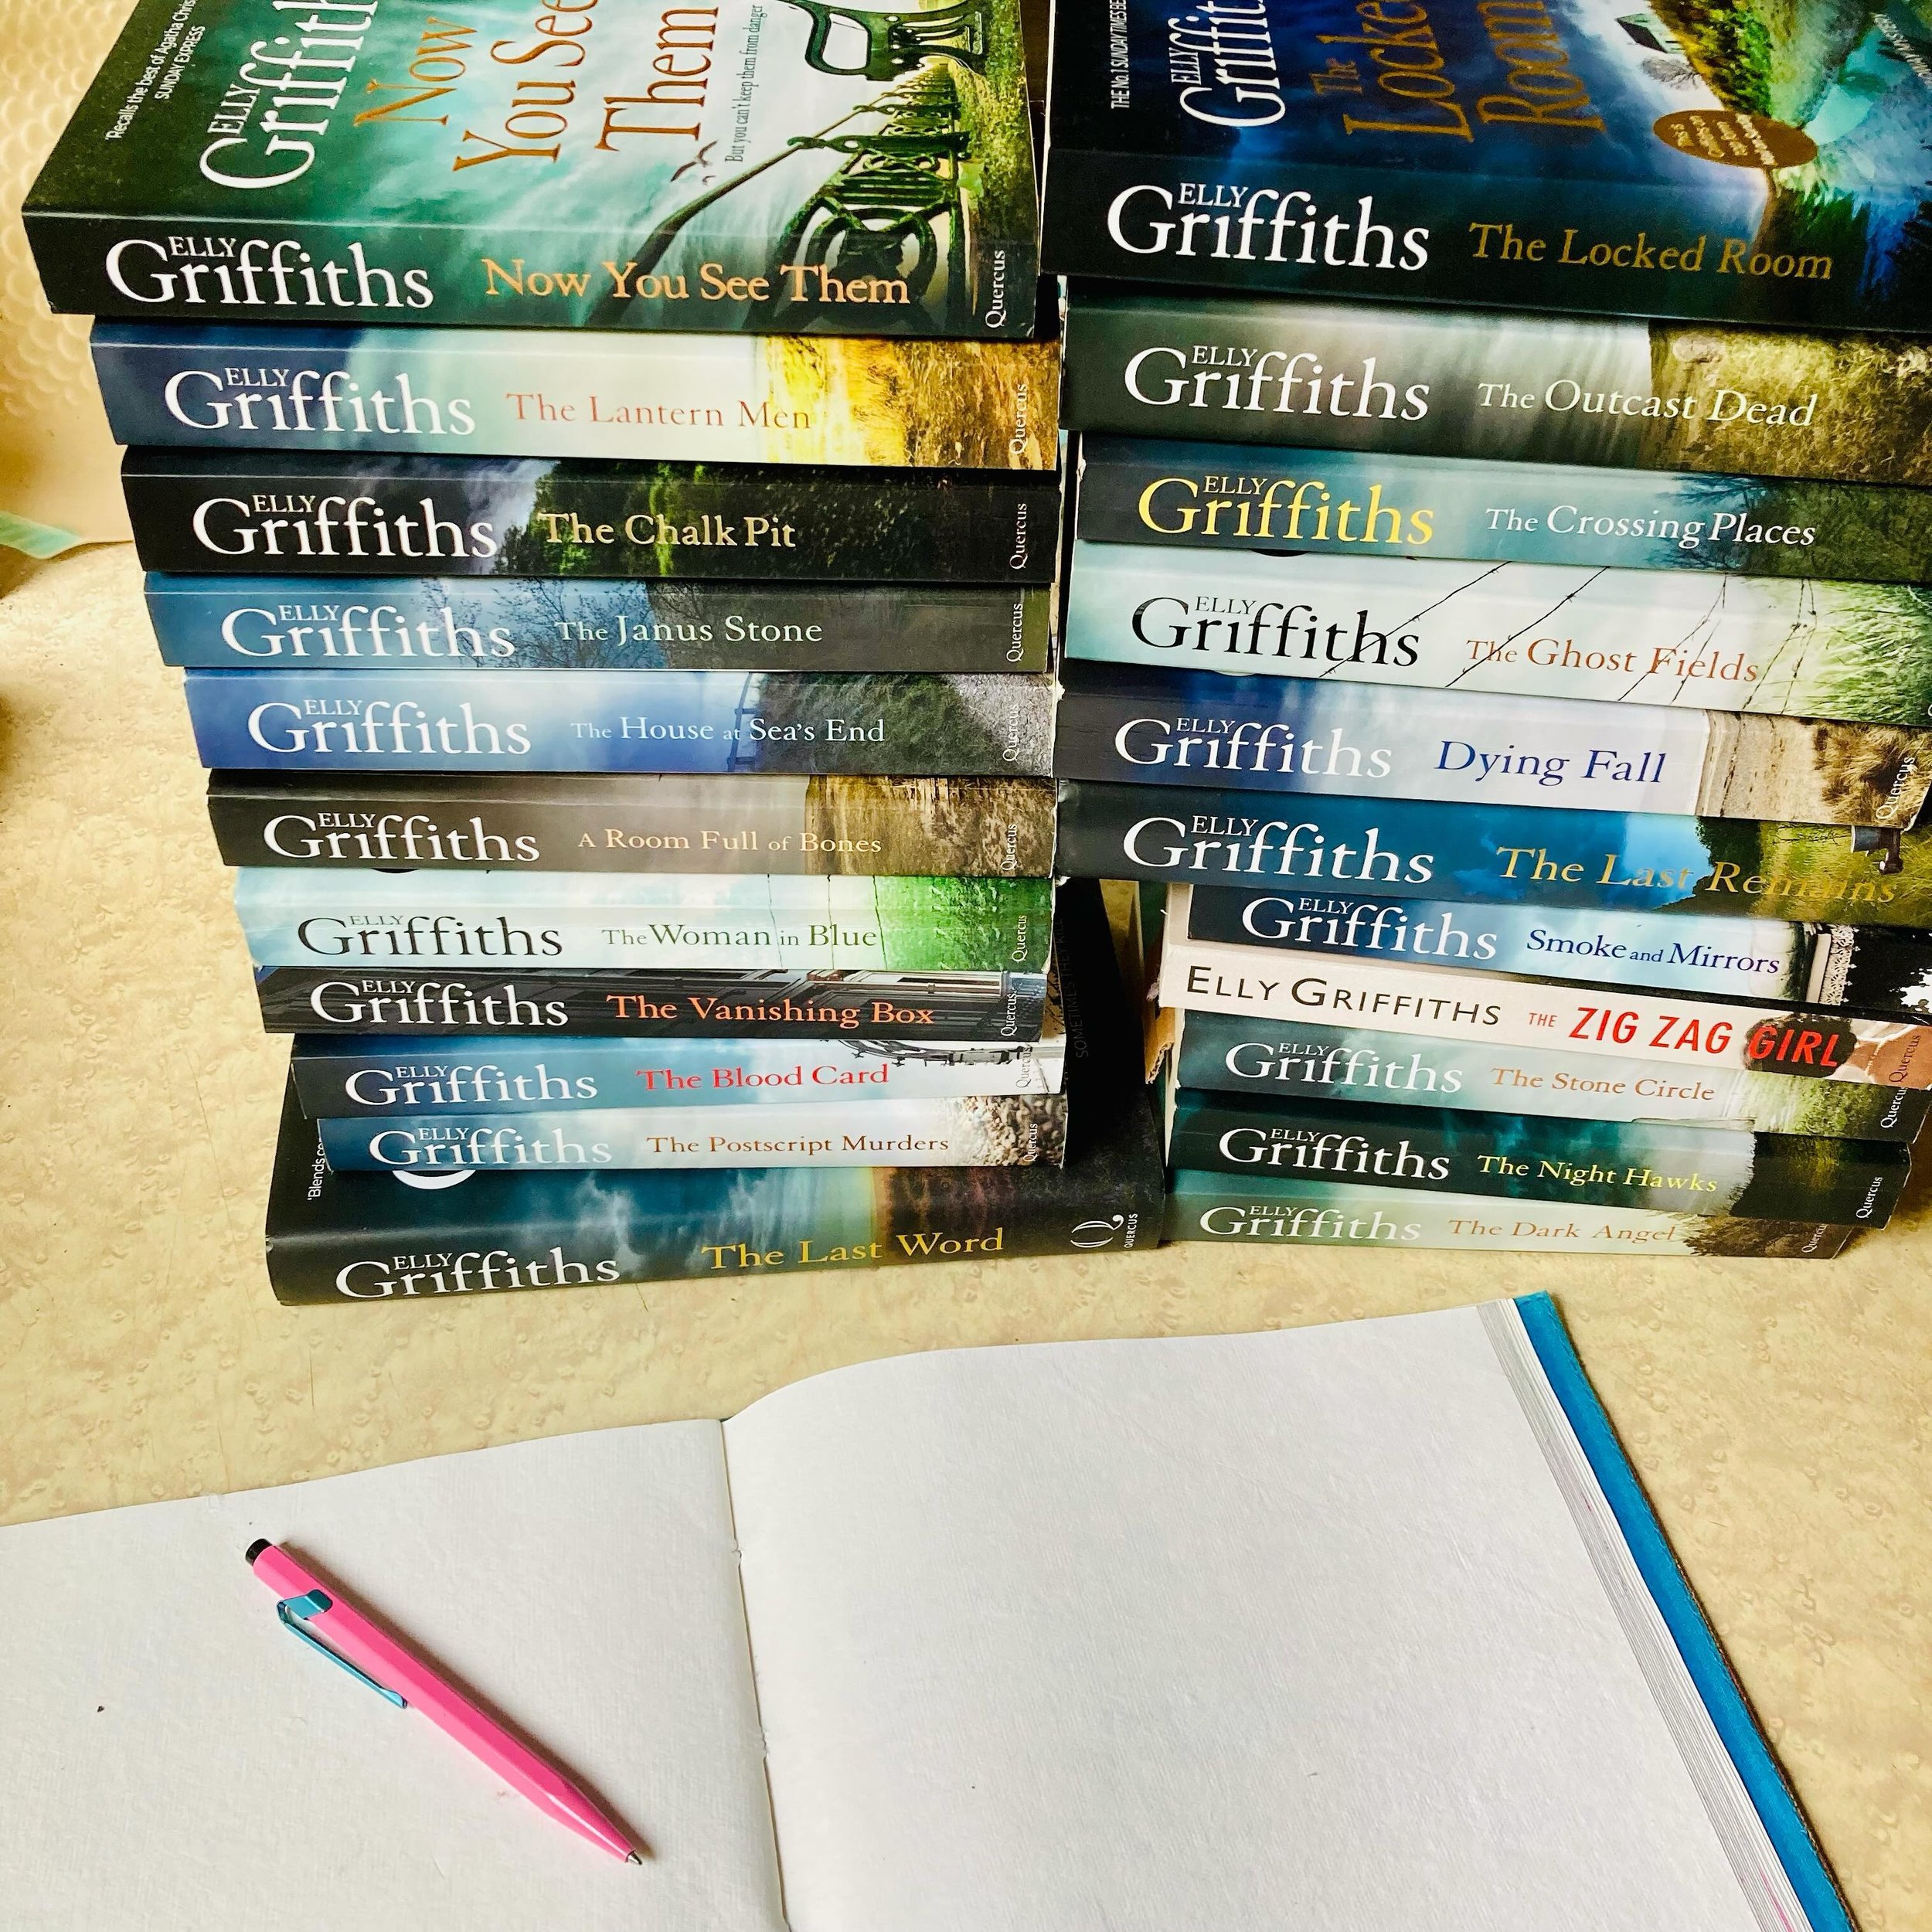 I&rsquo;m very excited to be interviewing one of my all-time favourite authors - and not just mine: bestselling AND critically acclaimed - @ellygriffiths17 at Bristol Central Library on the evening of Weds 19th June ✨📚 Do come! We&rsquo;ll be discus